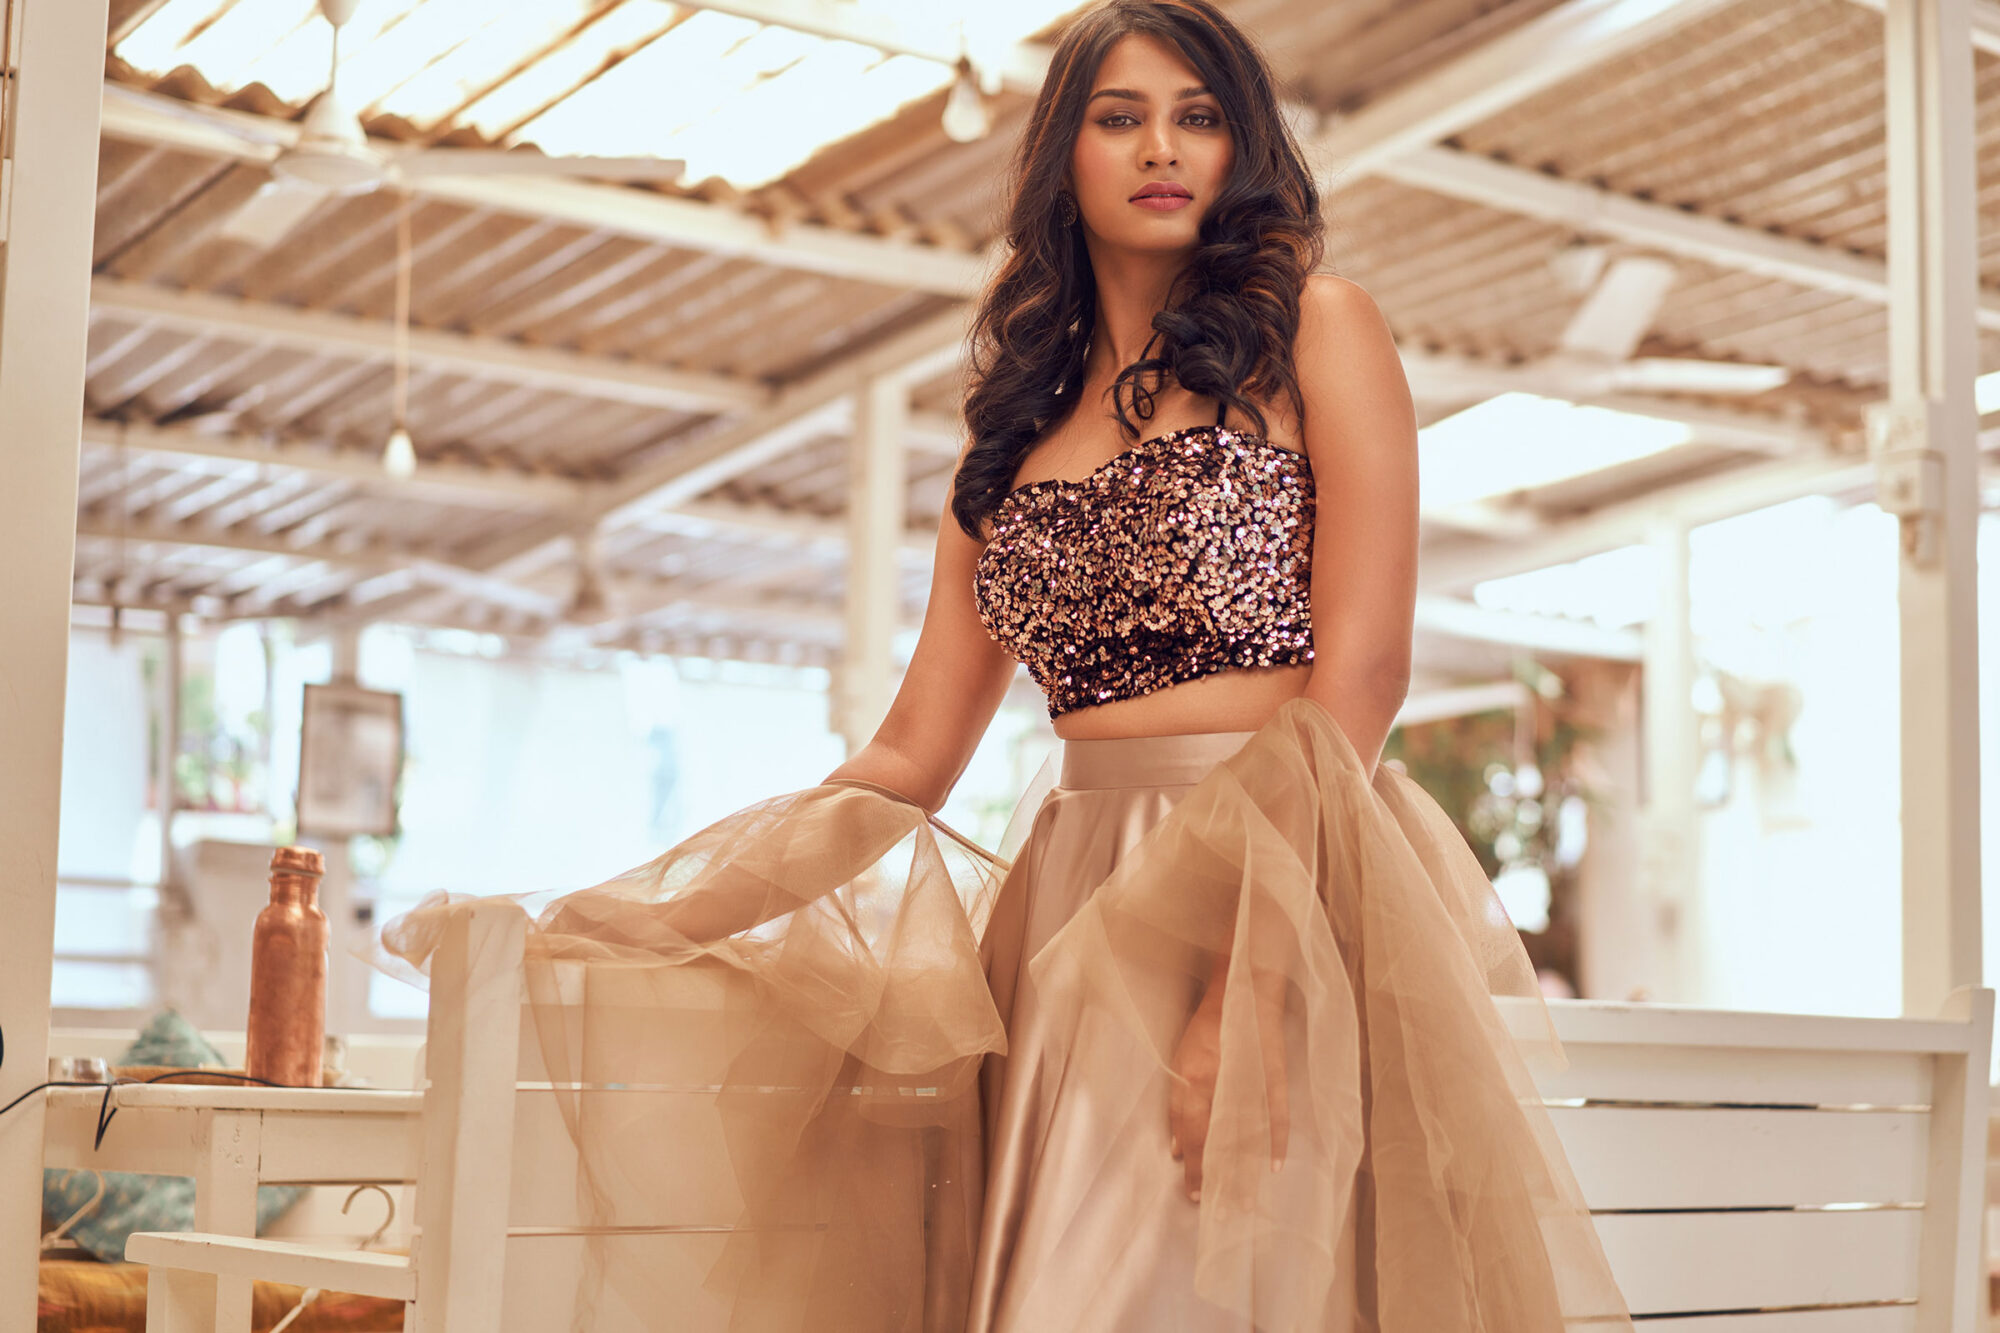 Anoosha Krishna in cocktail outfit photoshoot - South Indian Actress